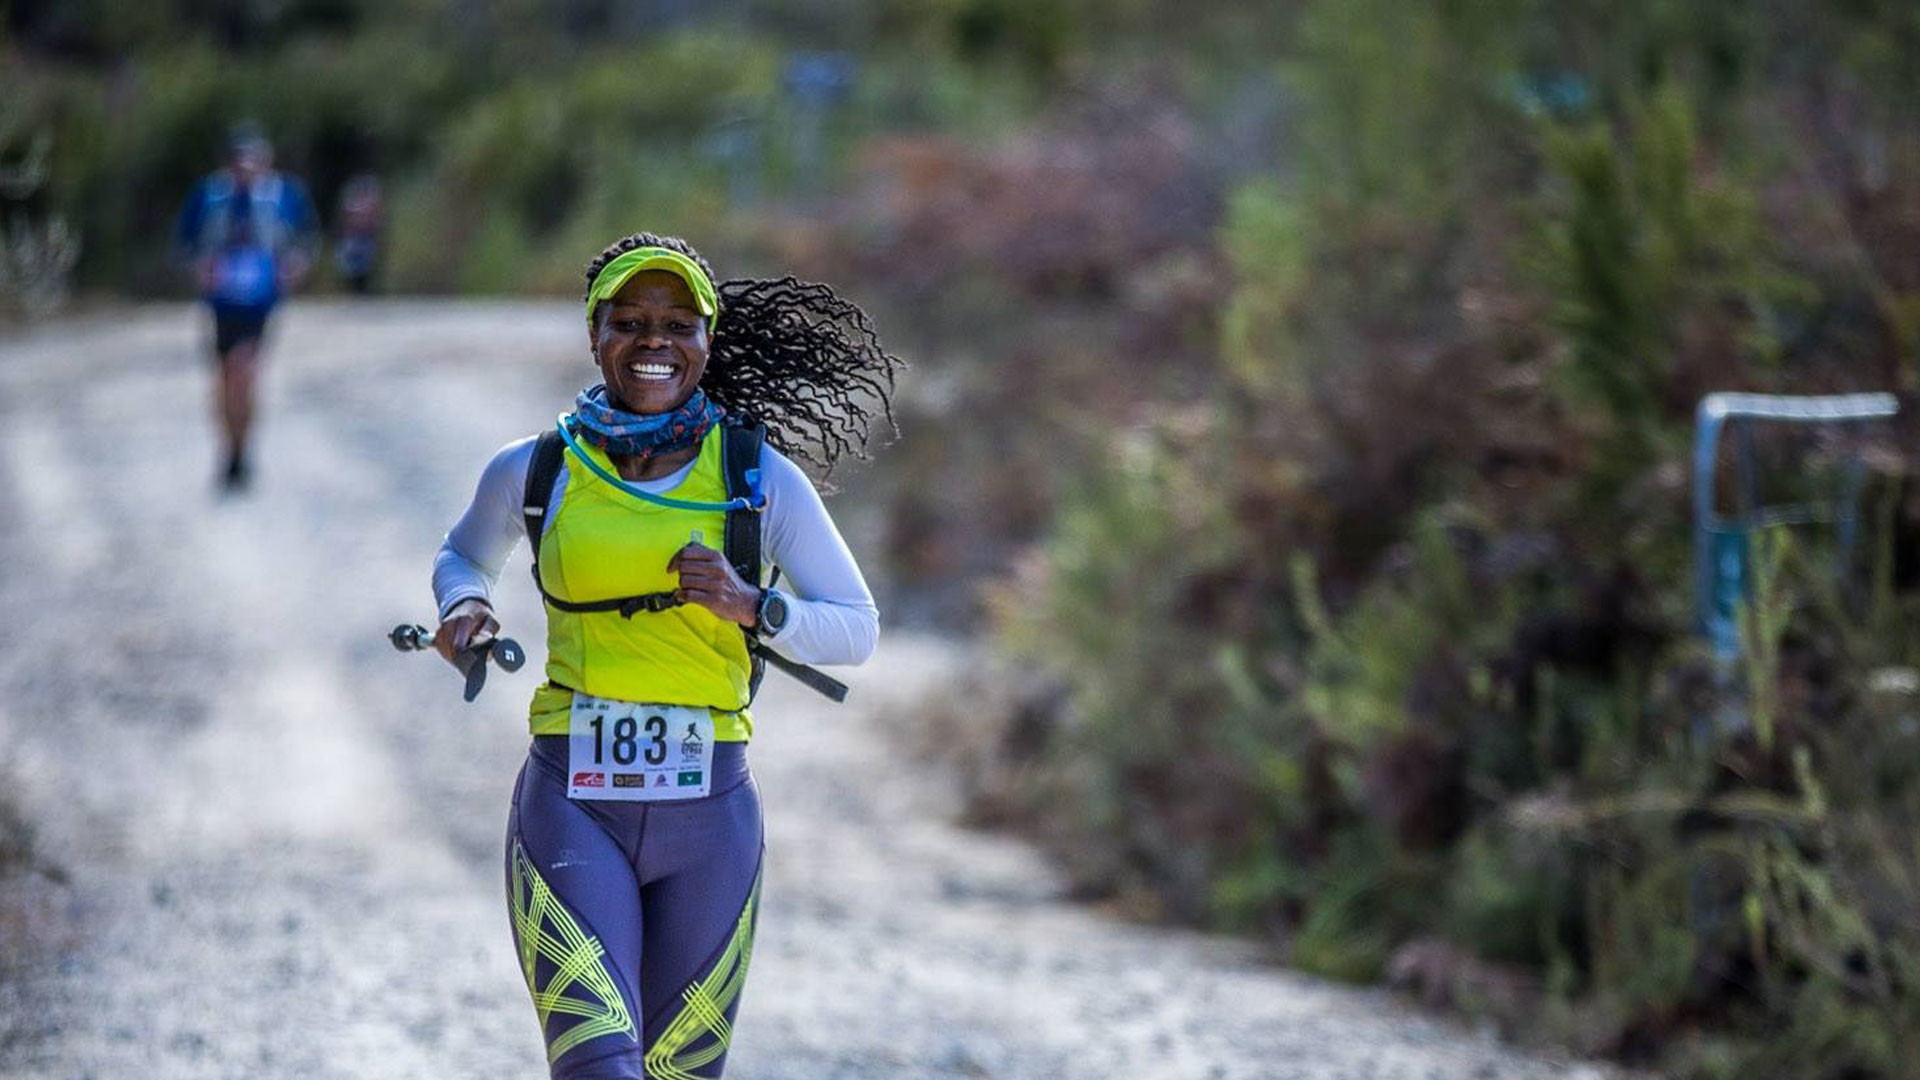 Nontuthuko Mgabhi from Richards Bay aims to be the first woman from Africa to run the World Marathon Challenge